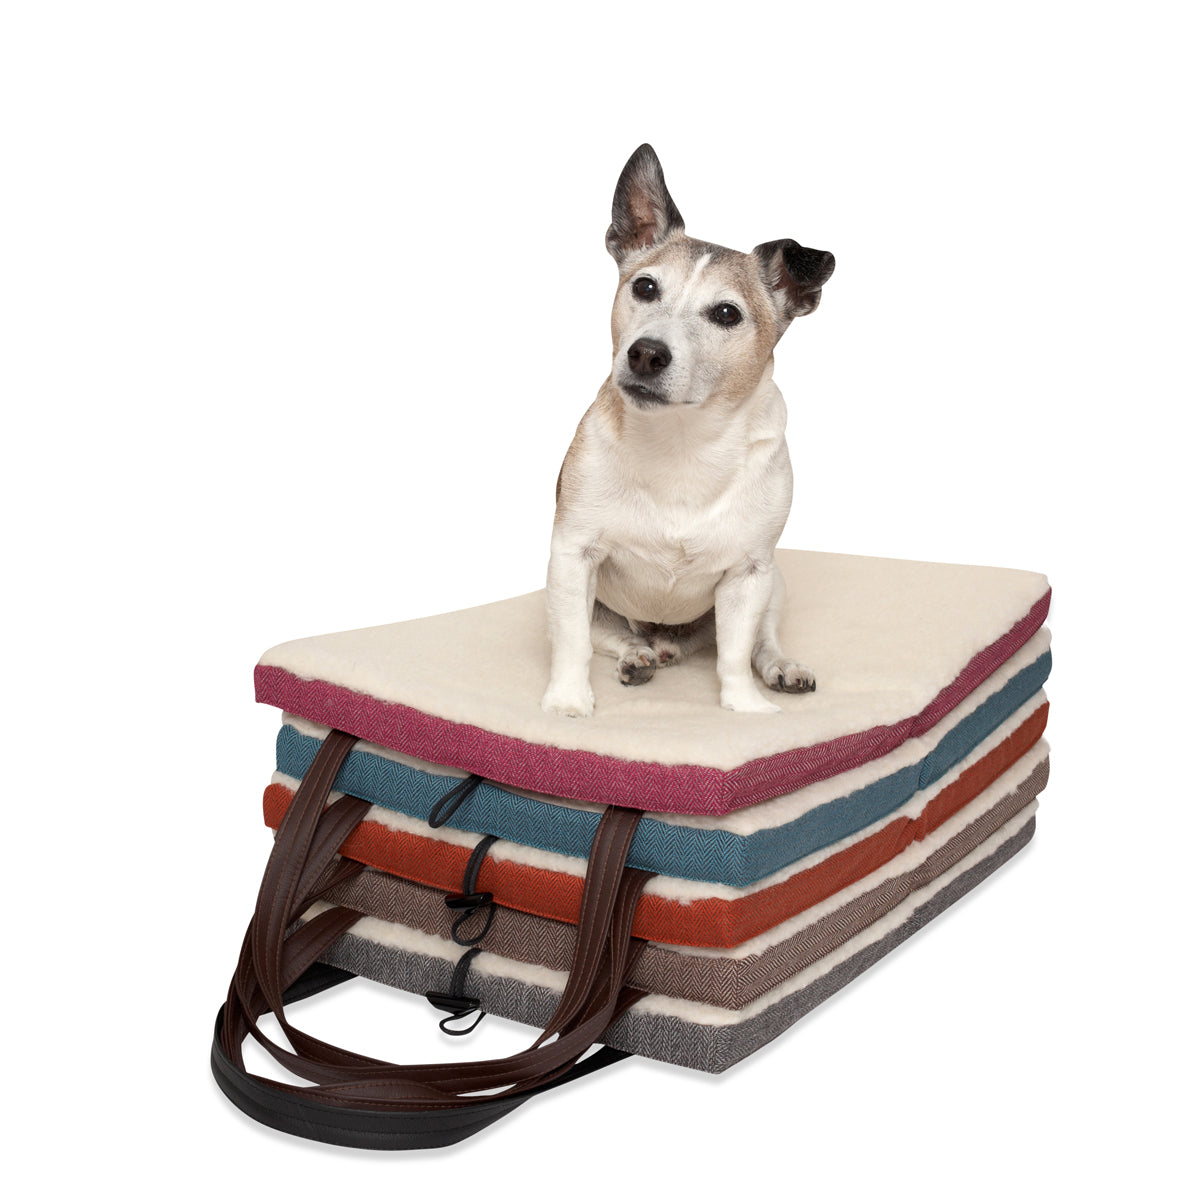 KONA CAVE® Folded portable dog beds stacked on top of each other. Brightly colored mats stacked on top of each other with a Jack Russell Terrier sitting on the top of the bed pile. 